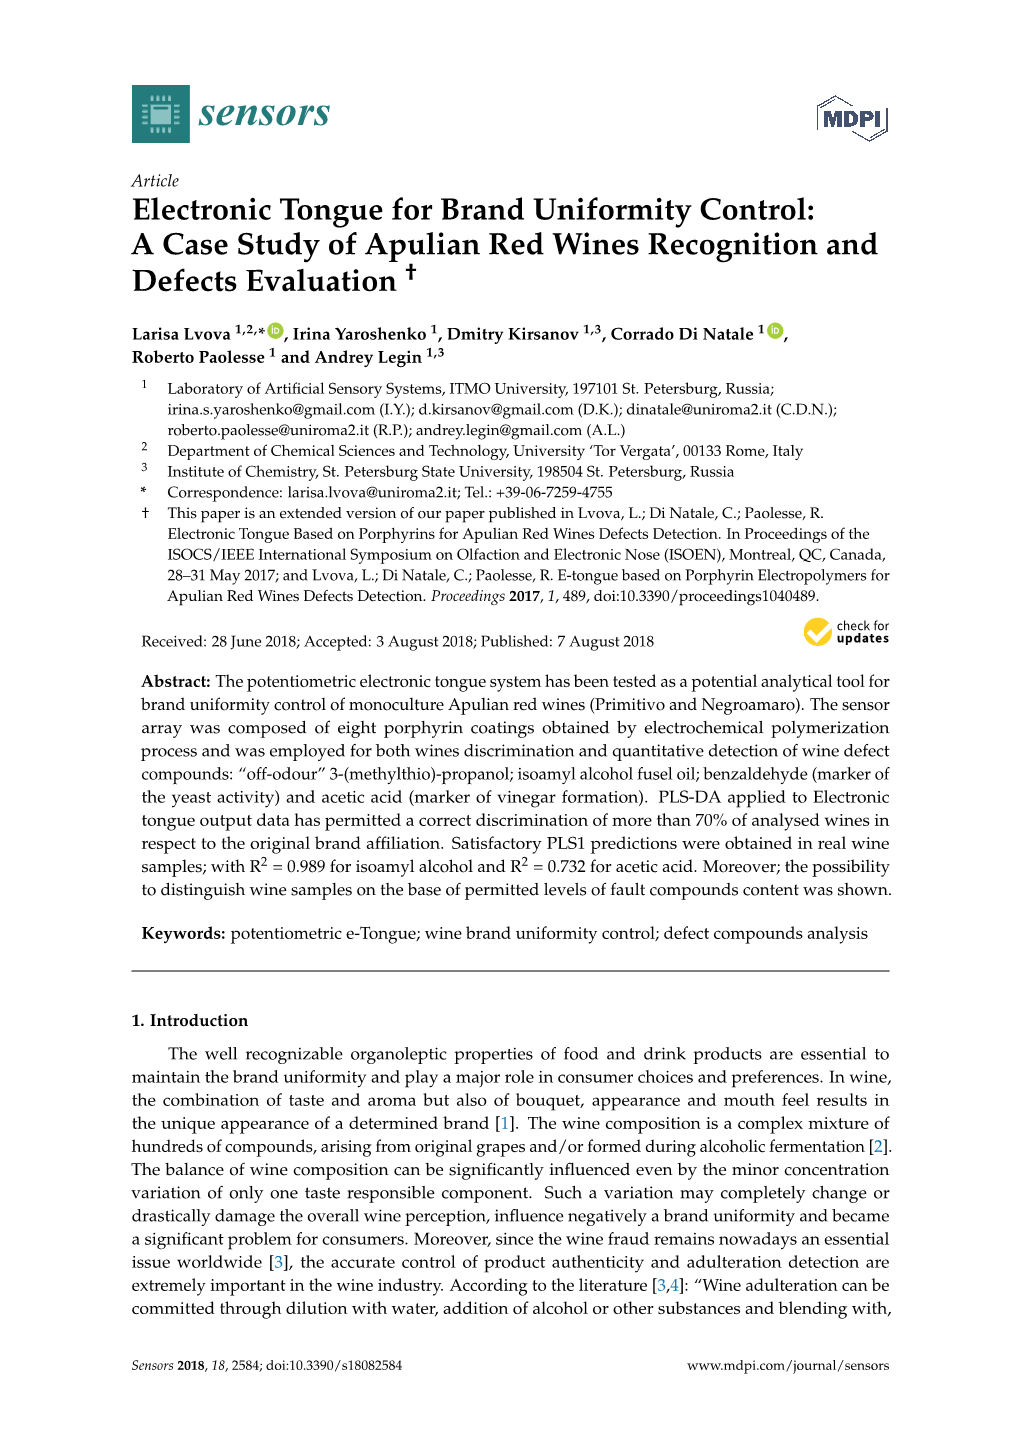 Electronic Tongue for Brand Uniformity Control: a Case Study of Apulian Red Wines Recognition and Defects Evaluation †